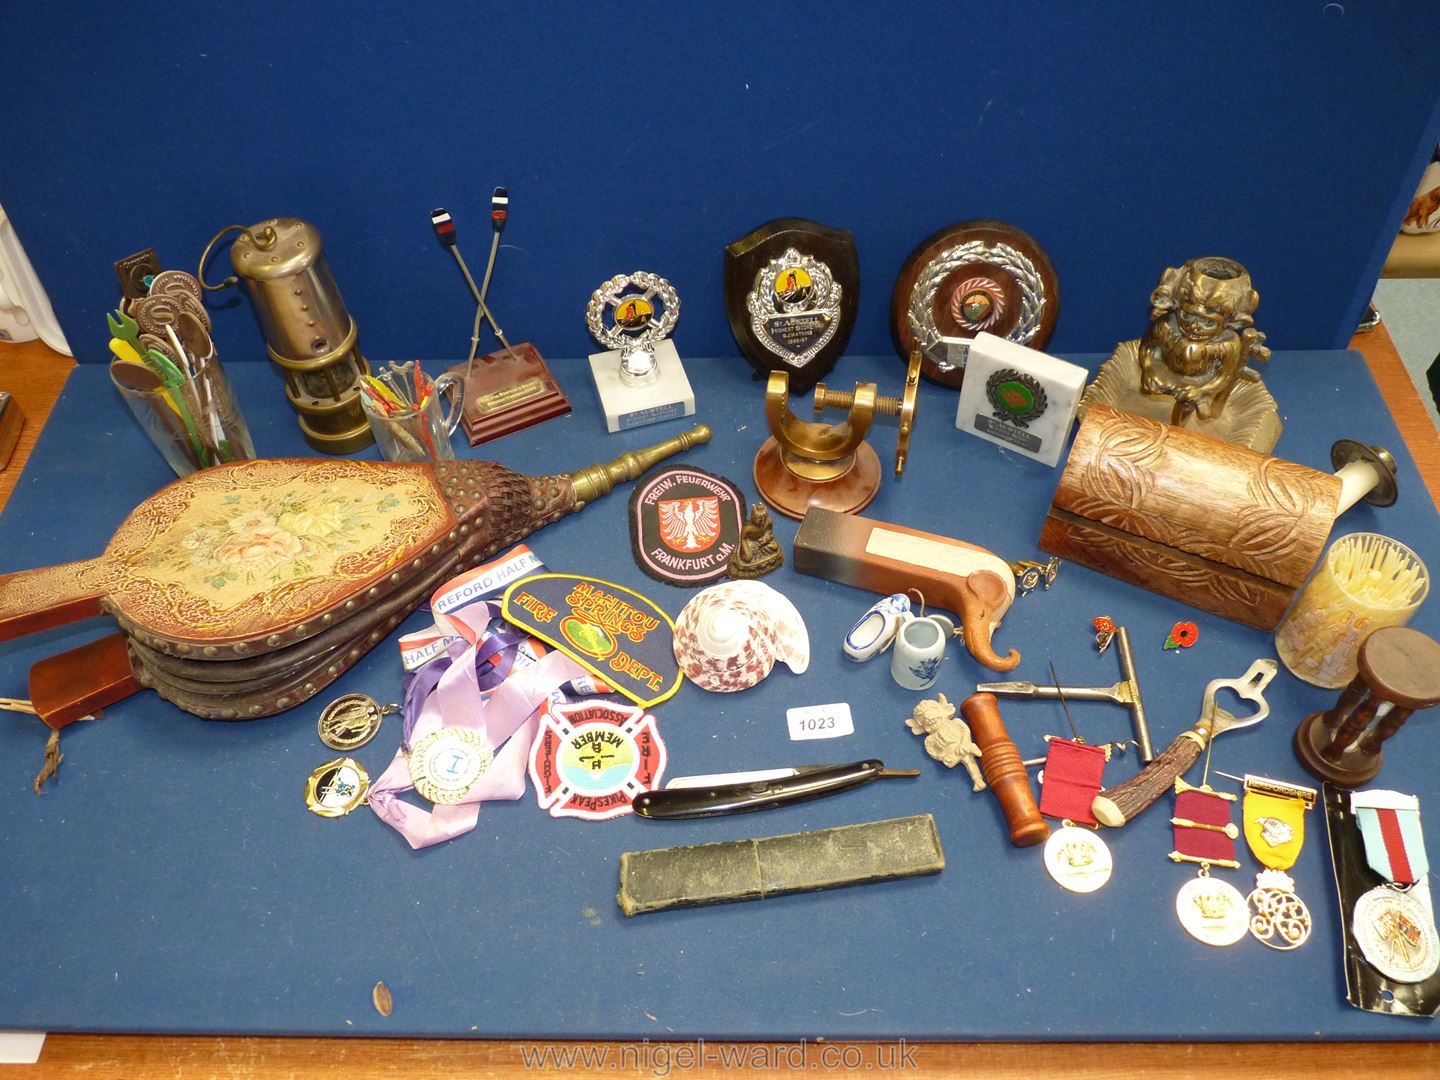 A quantity of miscellanea including a "The Crown and Sword Razor", bellows, small miners lamp,